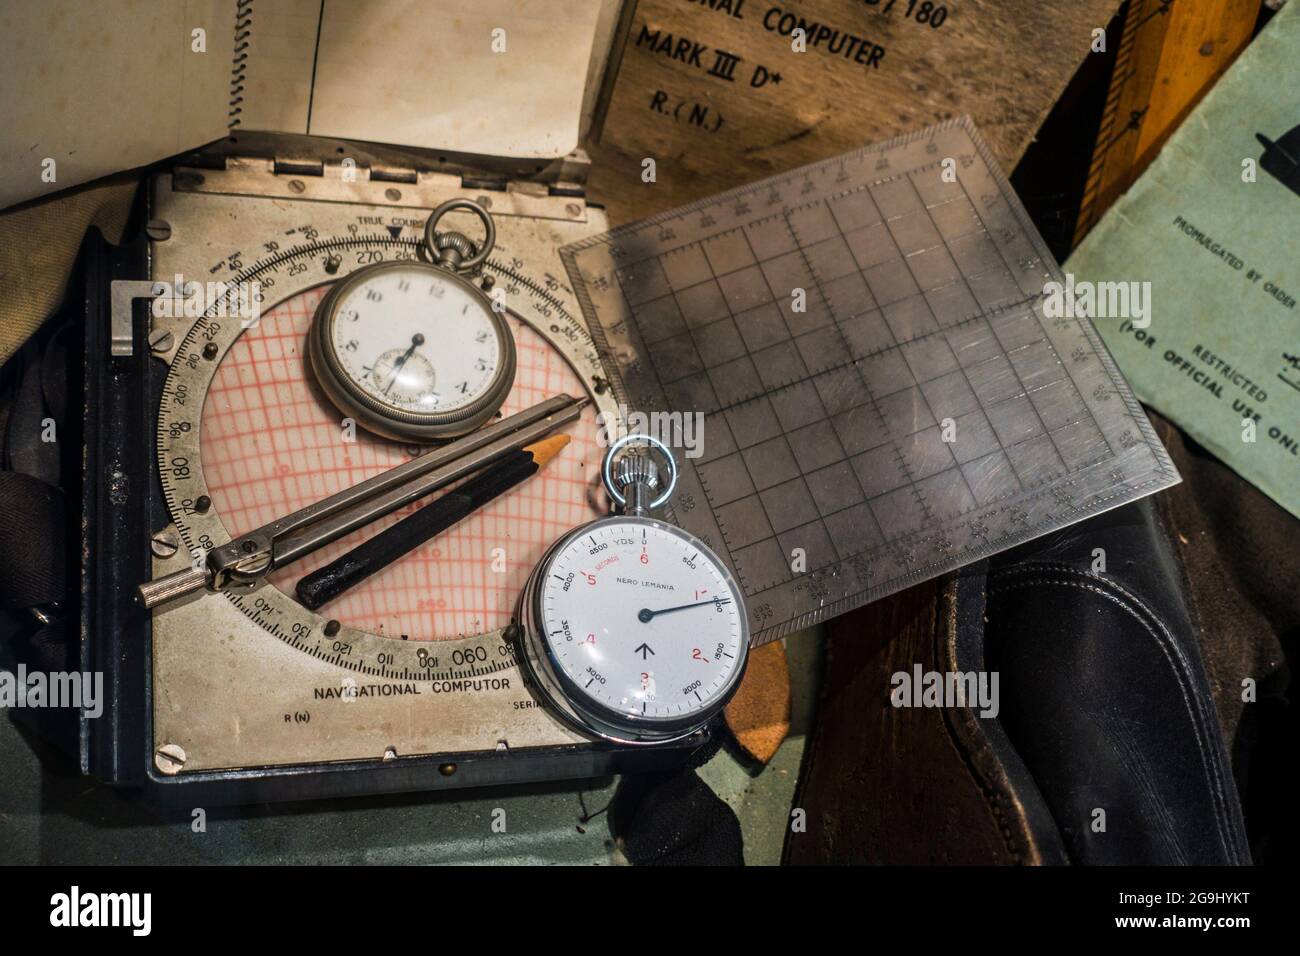 British WW2 navigational computer for calculating height corrections, Nero Lemania stopwatch, used by RAF pilots during World War II Stock Photo